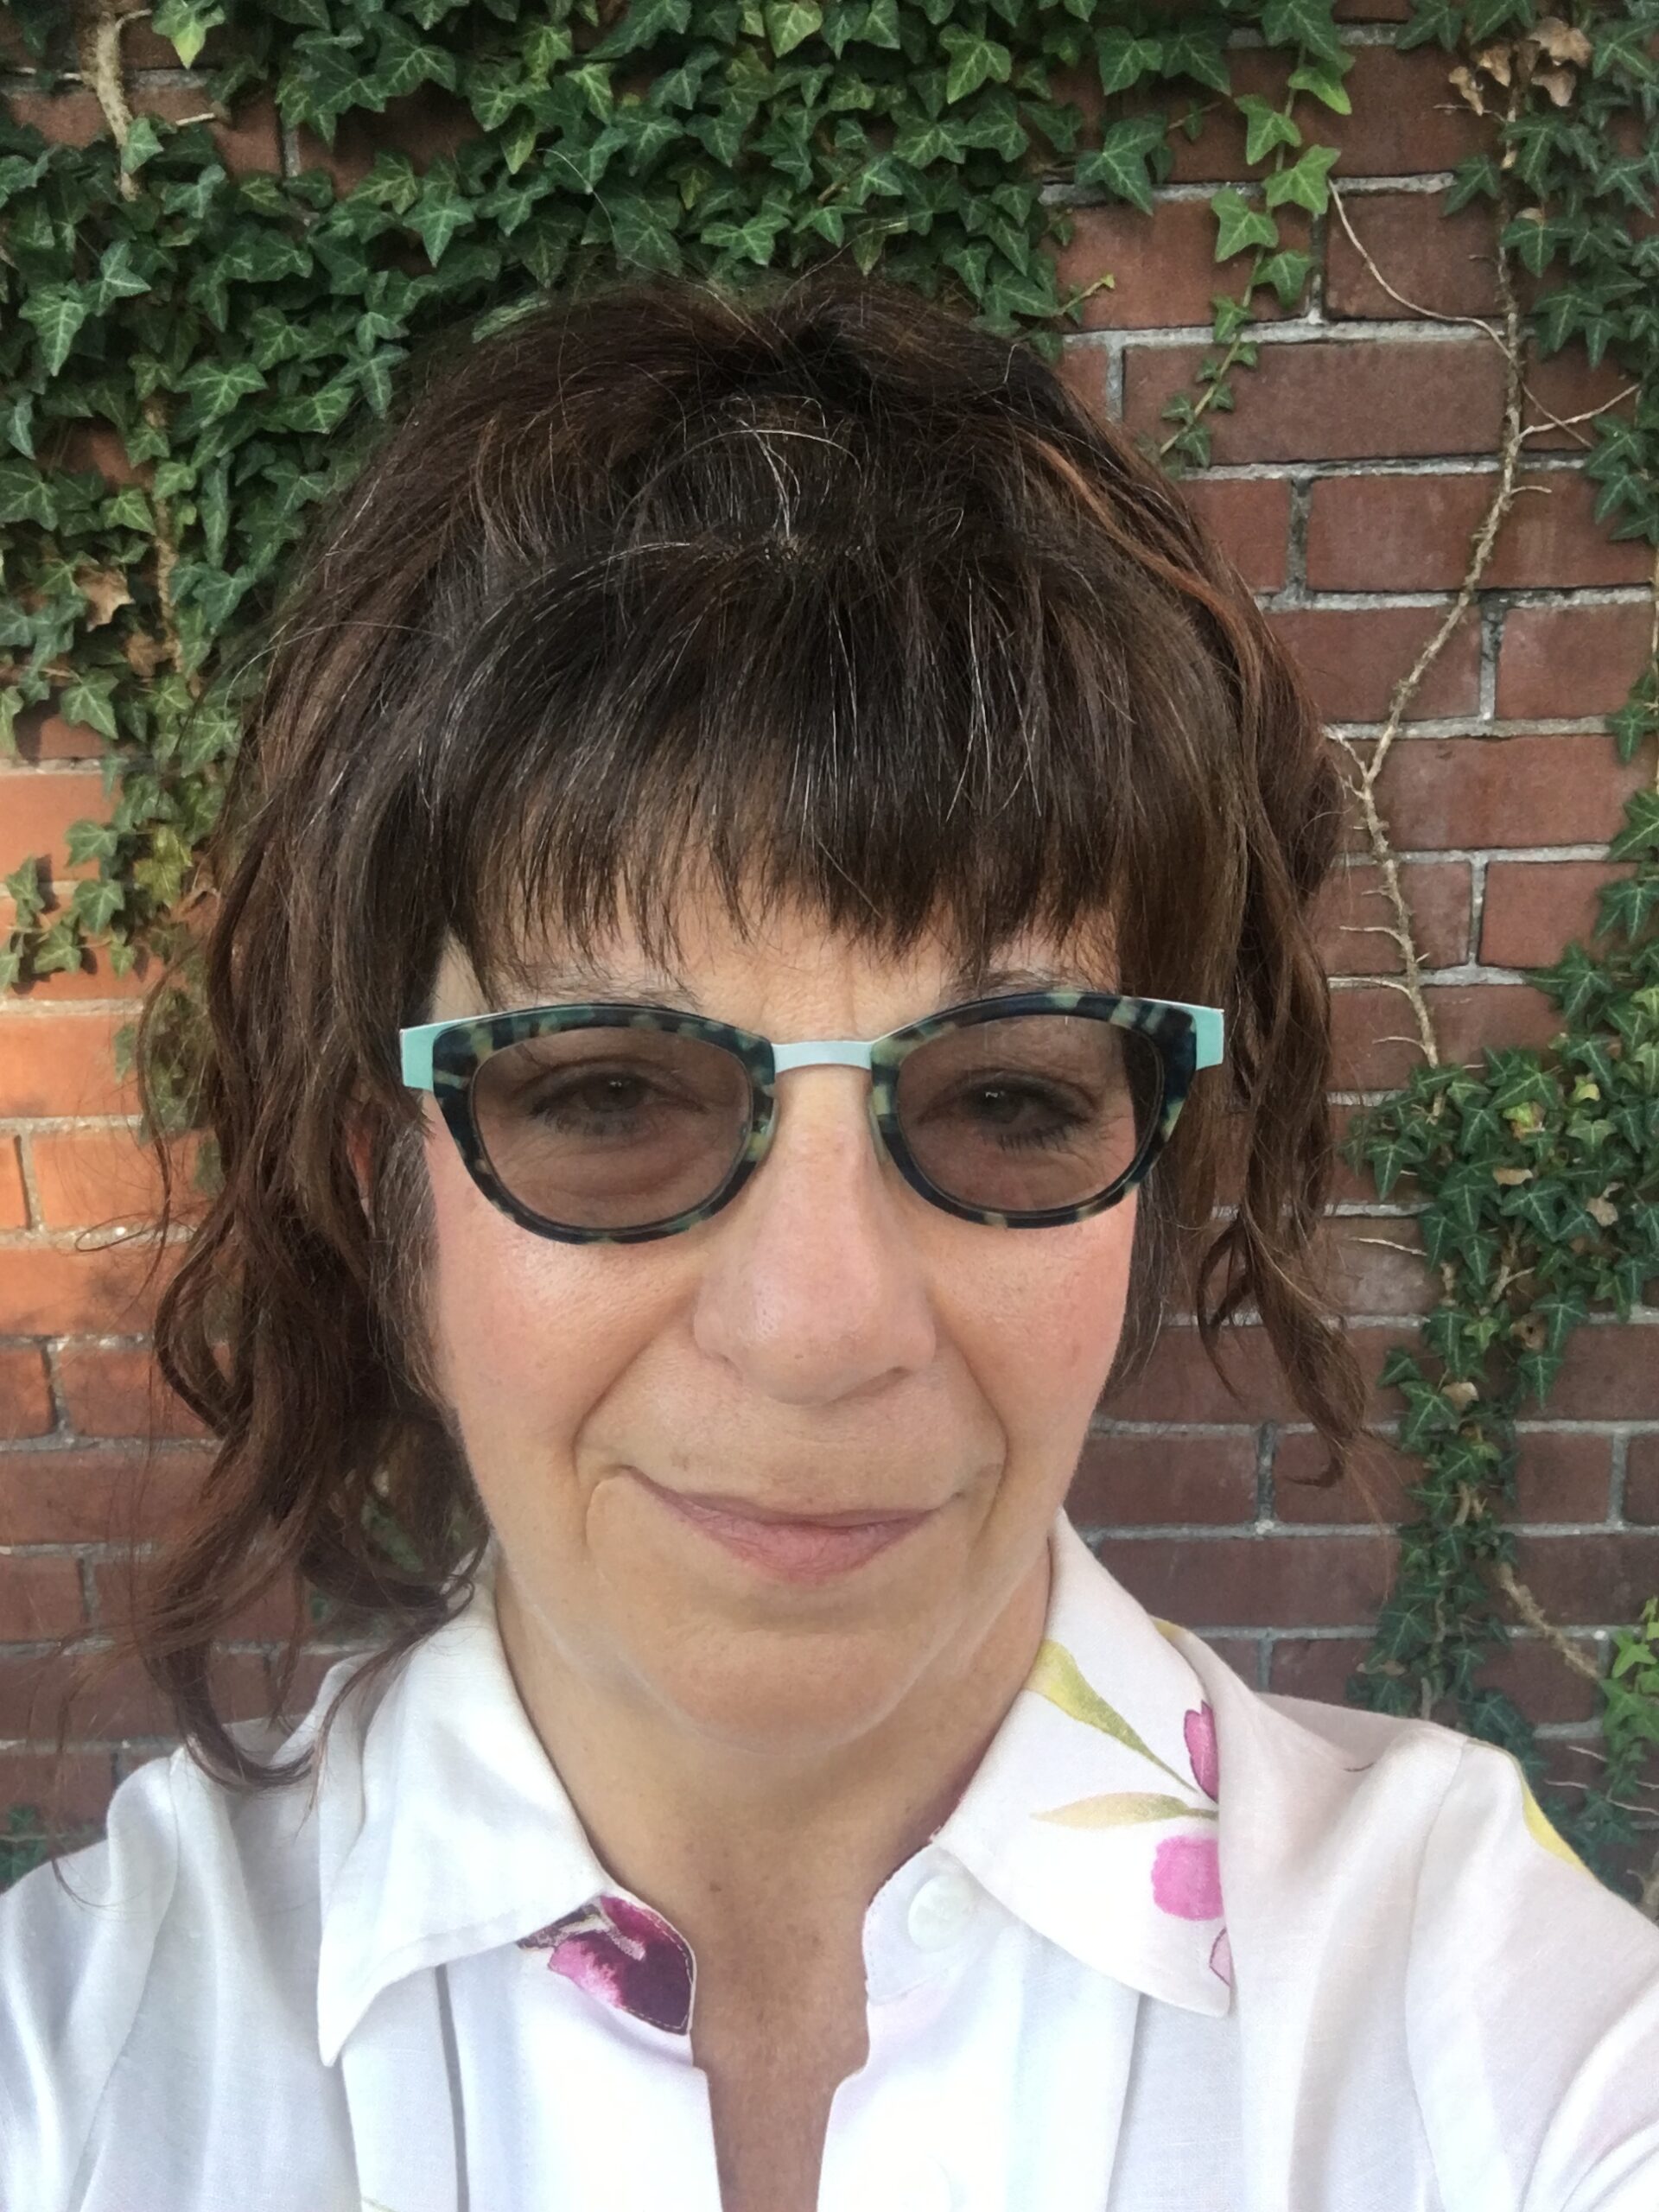 Margaret is looking at the camera and smiling. She is wearing glasses and a white shirt. There is a brick wall with vines behind her.